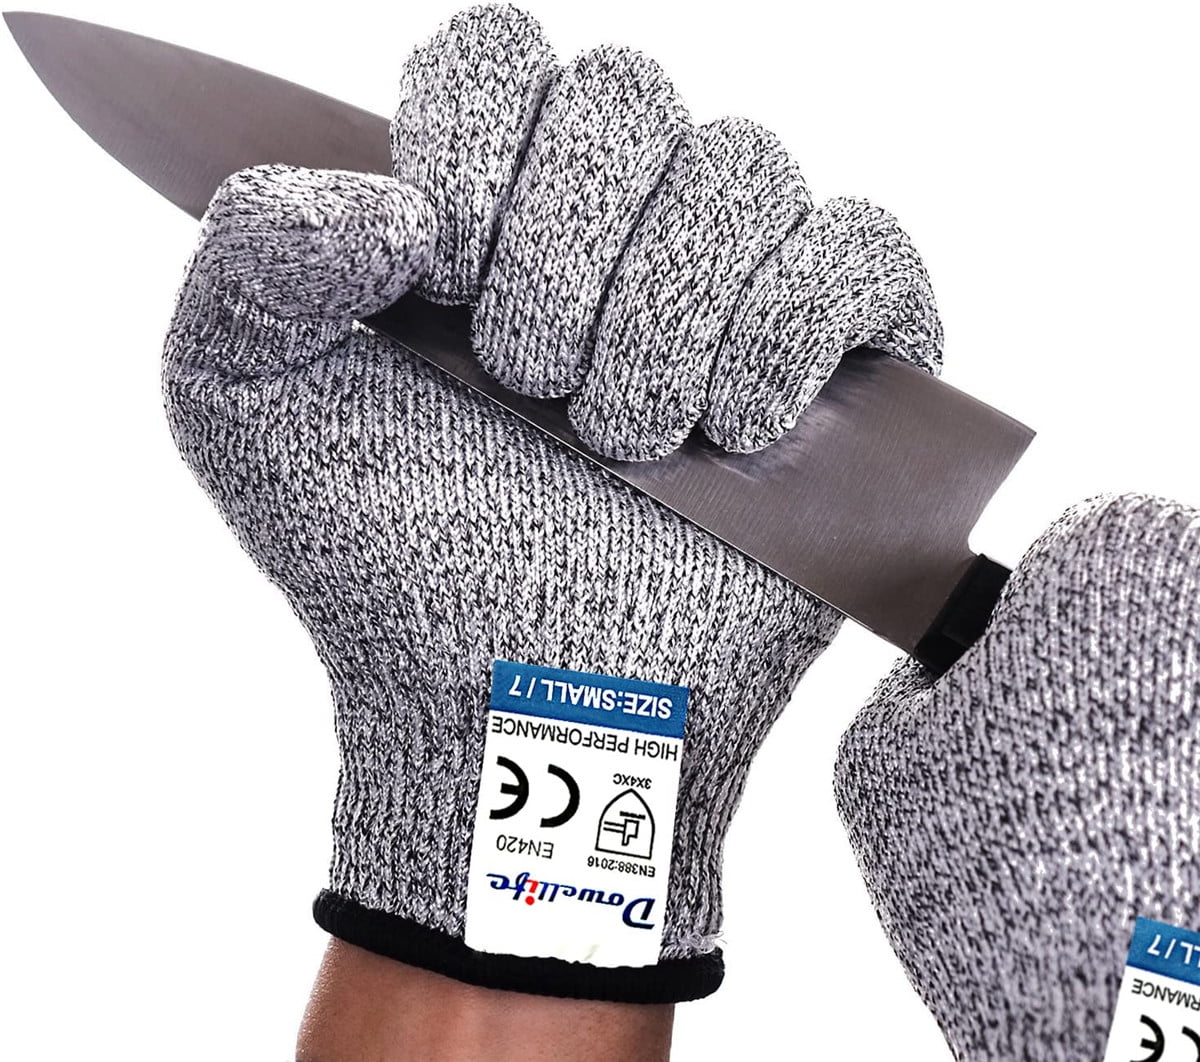 Cut Resistant Gloves, Level 5 Protection Cutting Gloves, Kitchen